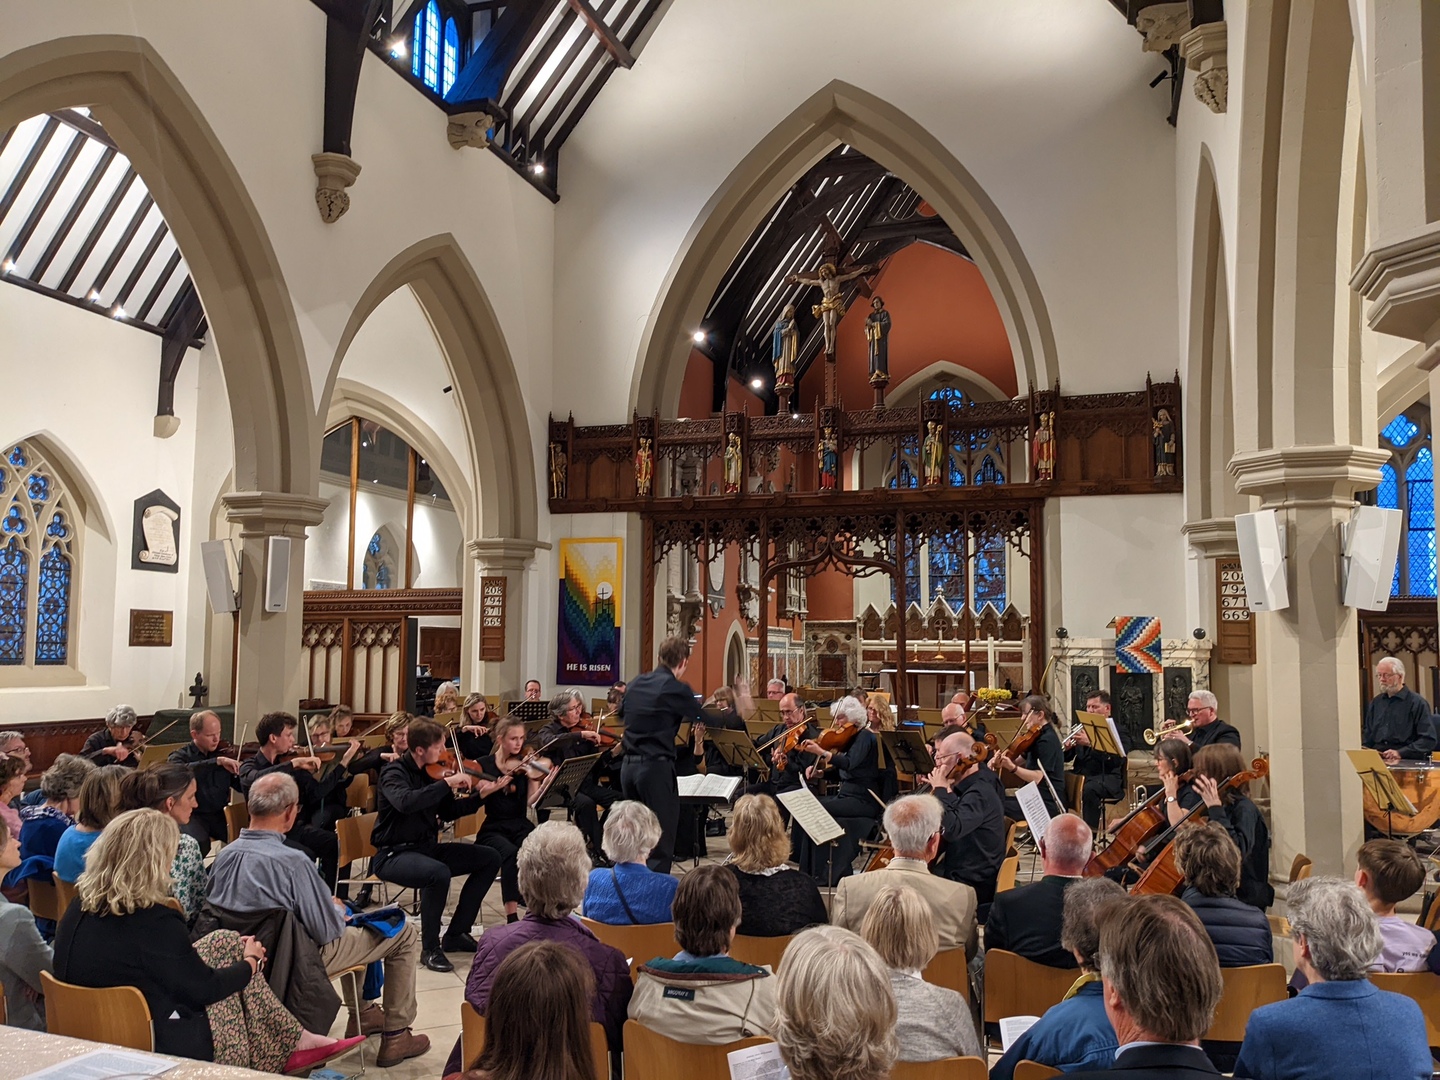 Langtree Sinfonia concert on May 18th at St Mary le More in Wallingford, Wallingford, England, United Kingdom